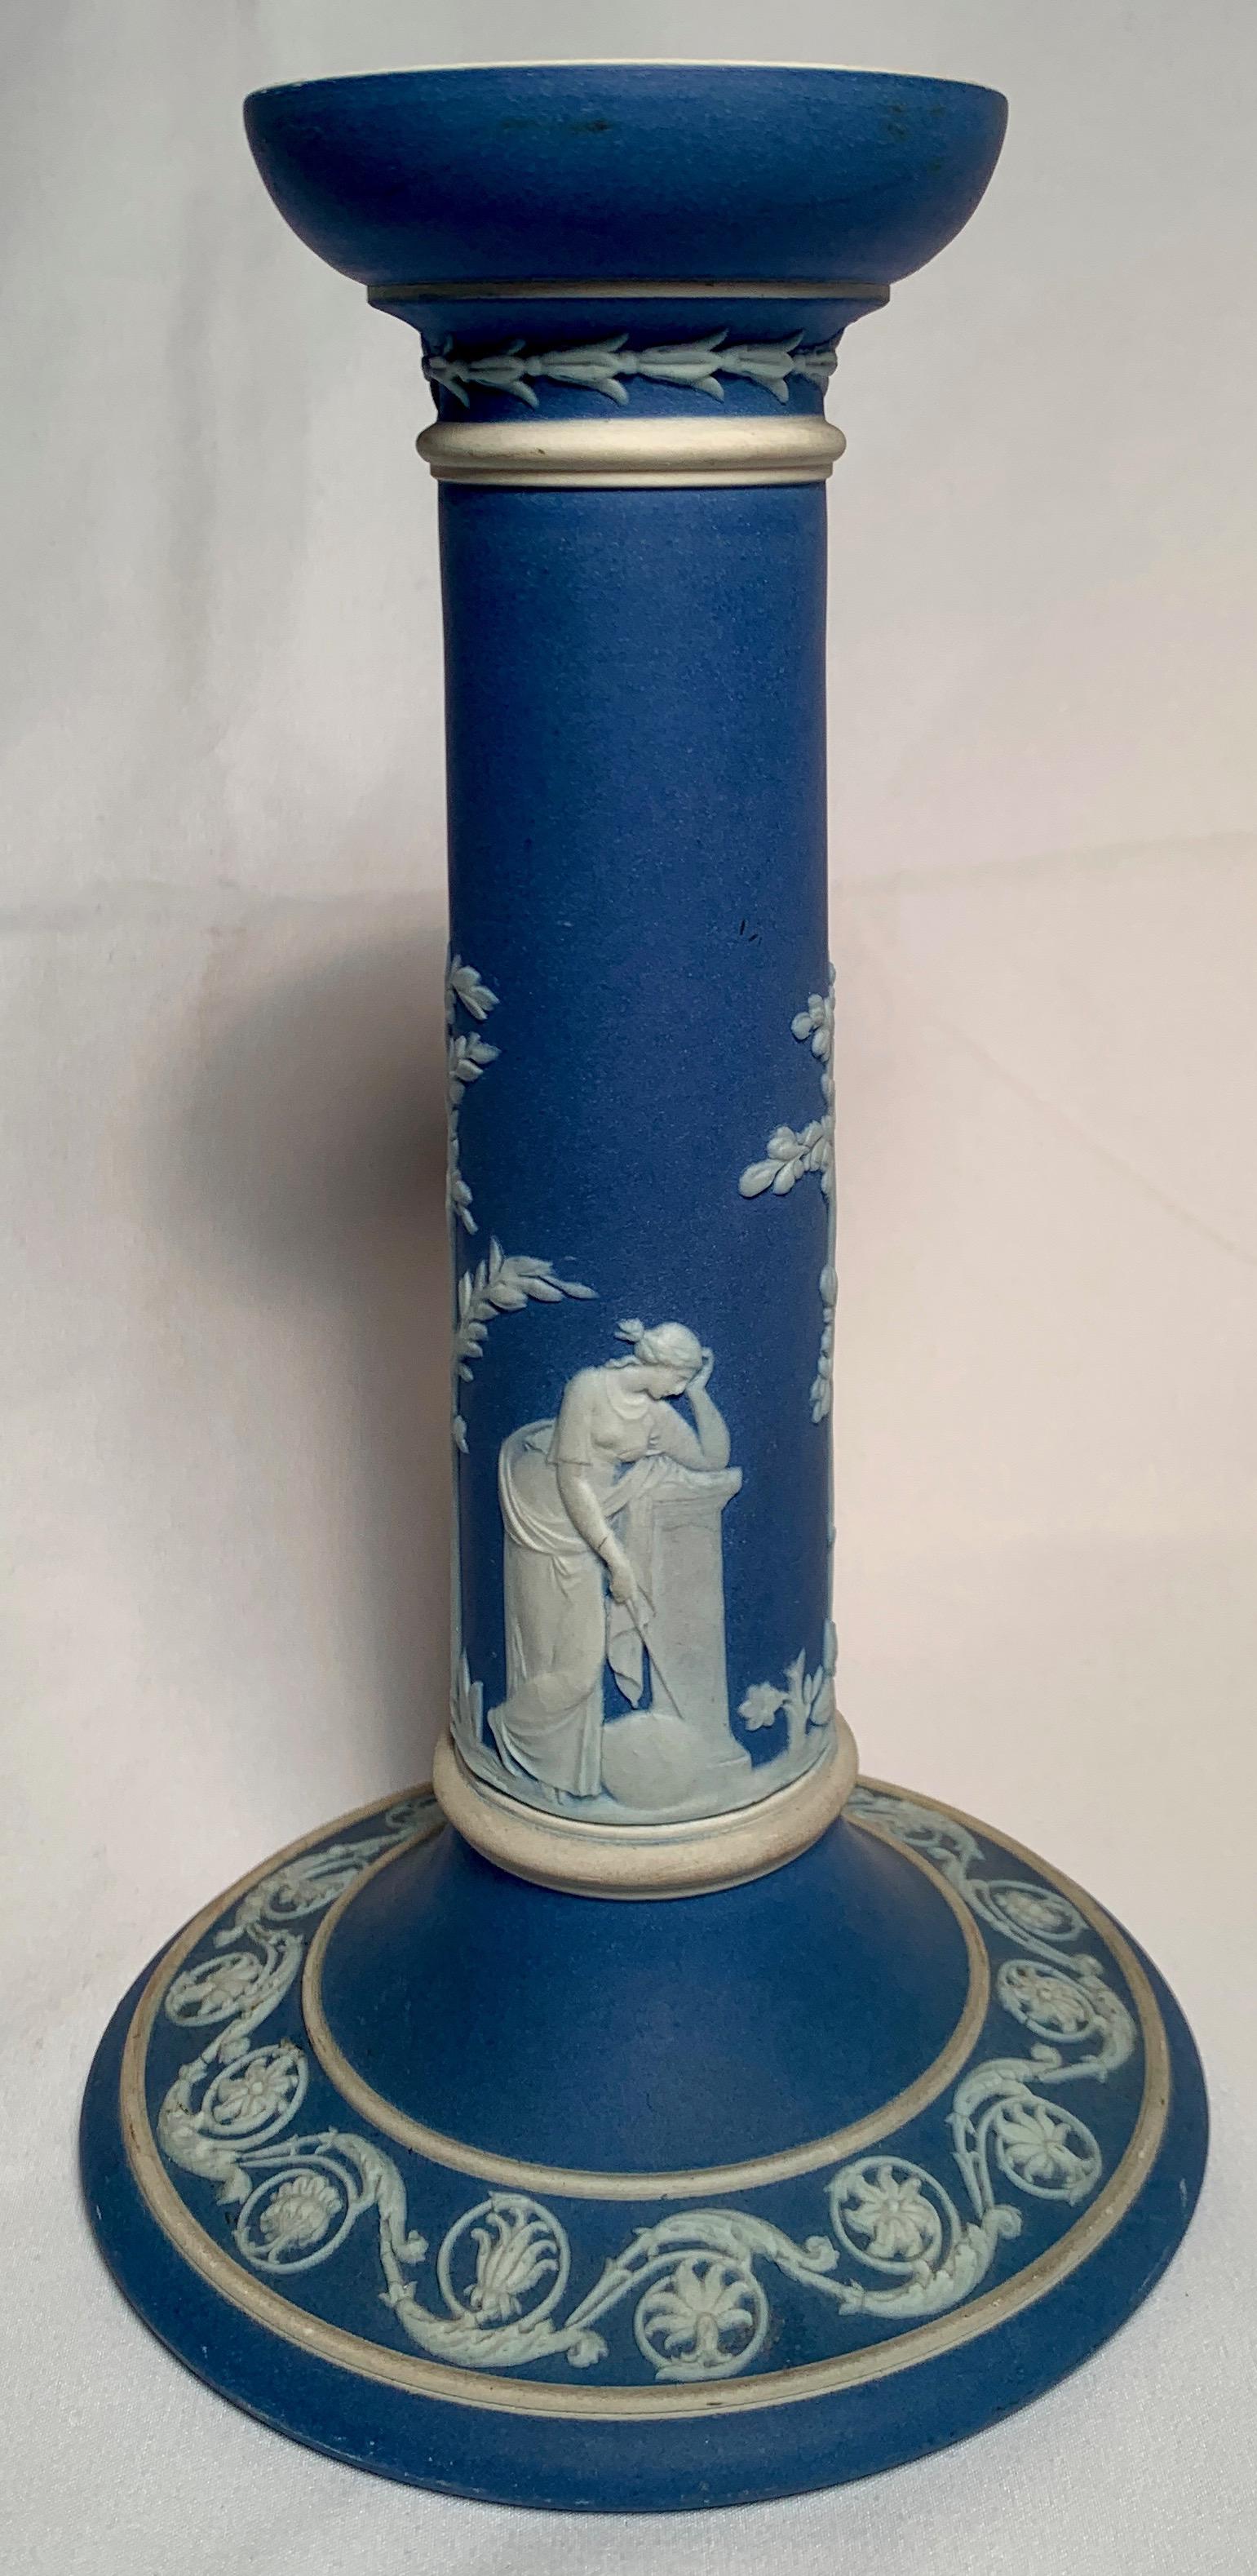 Everyone loves Wedgwood and these are a nice size candlestick.